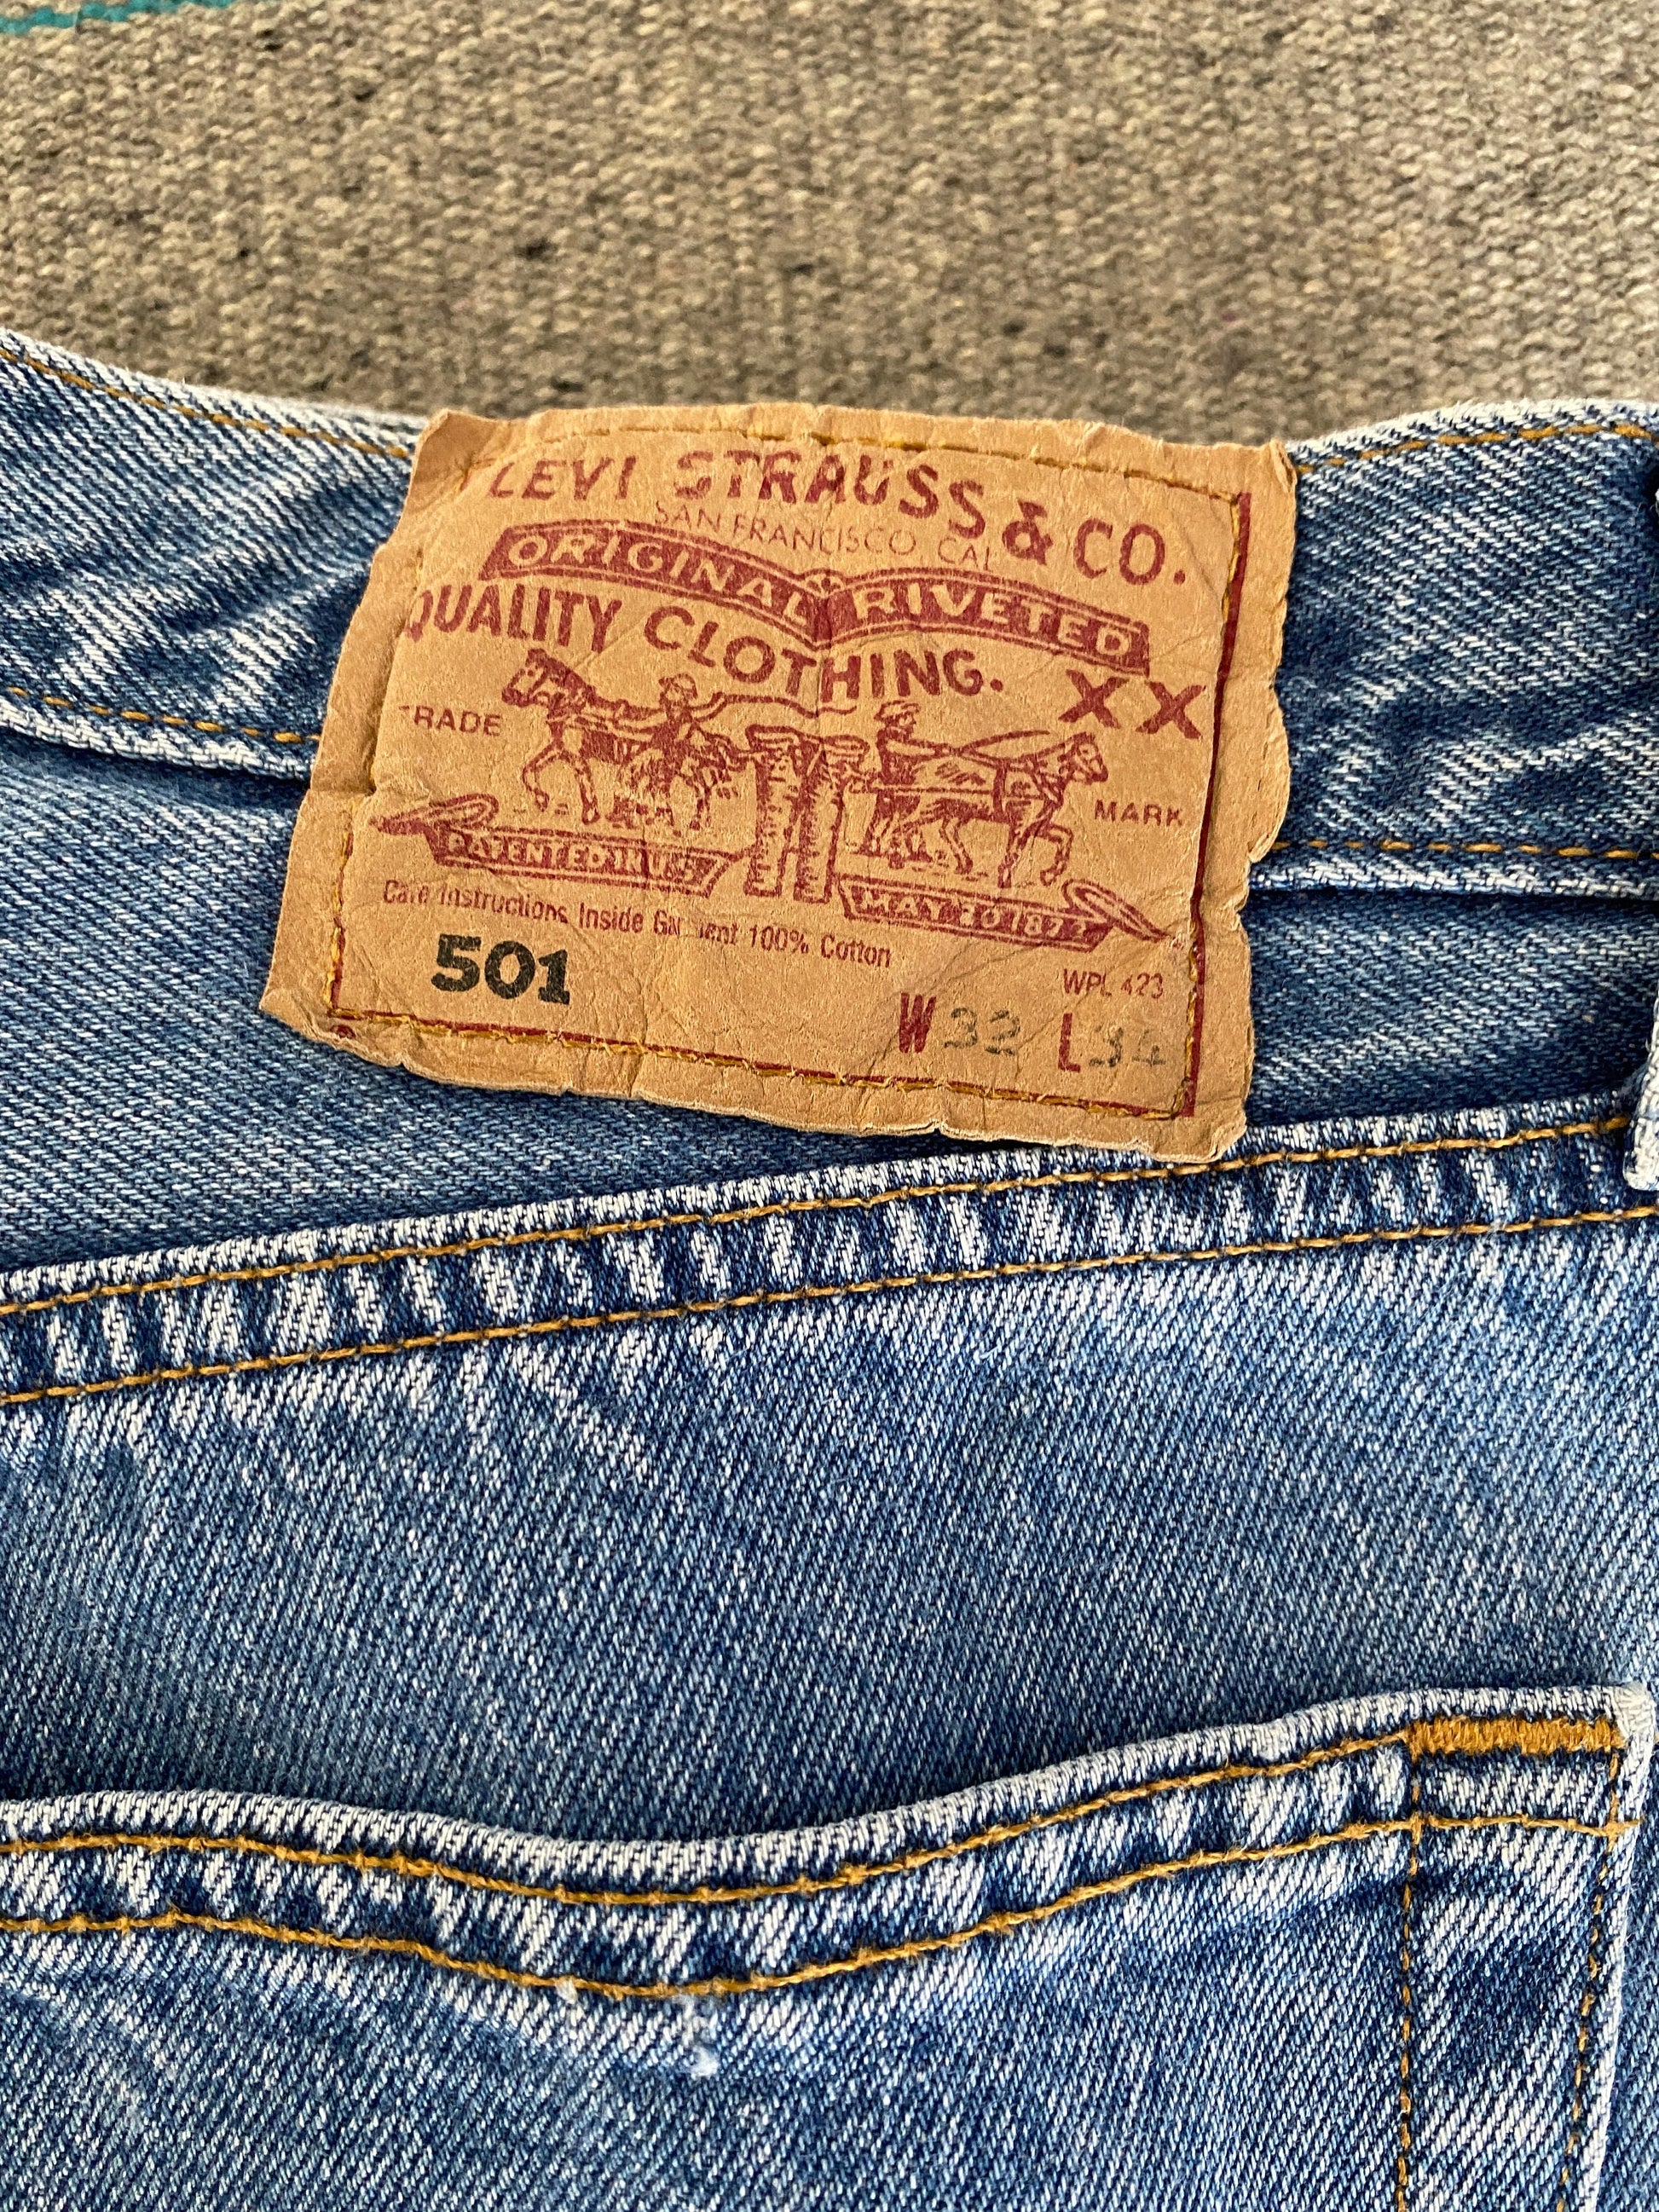 Levi's 501 Vintage Jeans Made in Mexico - Size 32x34 BLUE